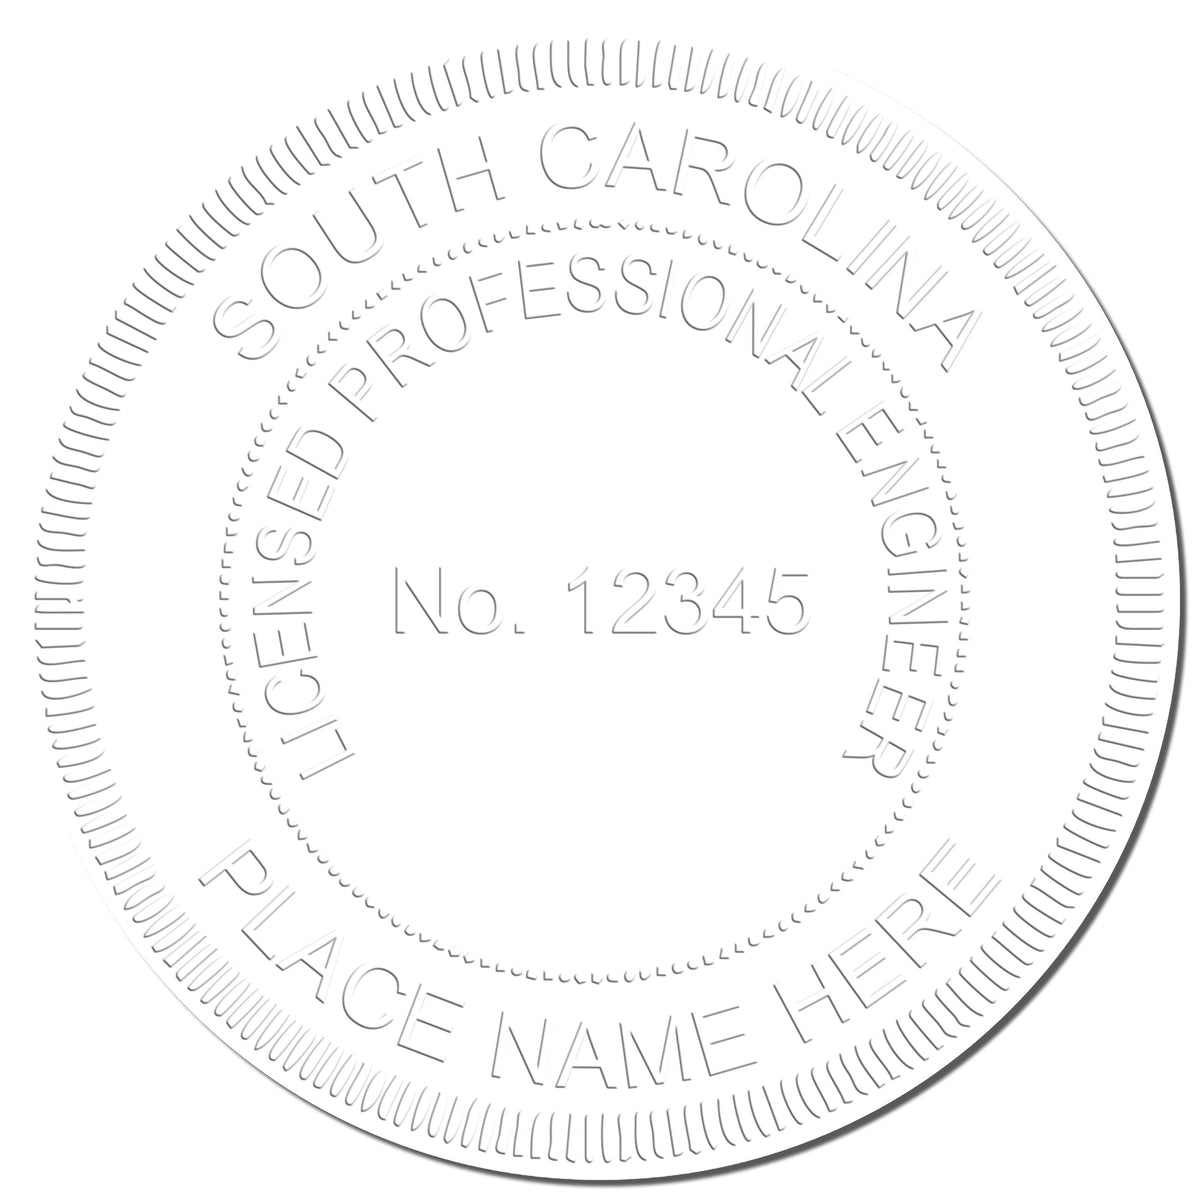 A photograph of the Handheld South Carolina Professional Engineer Embosser stamp impression reveals a vivid, professional image of the on paper.